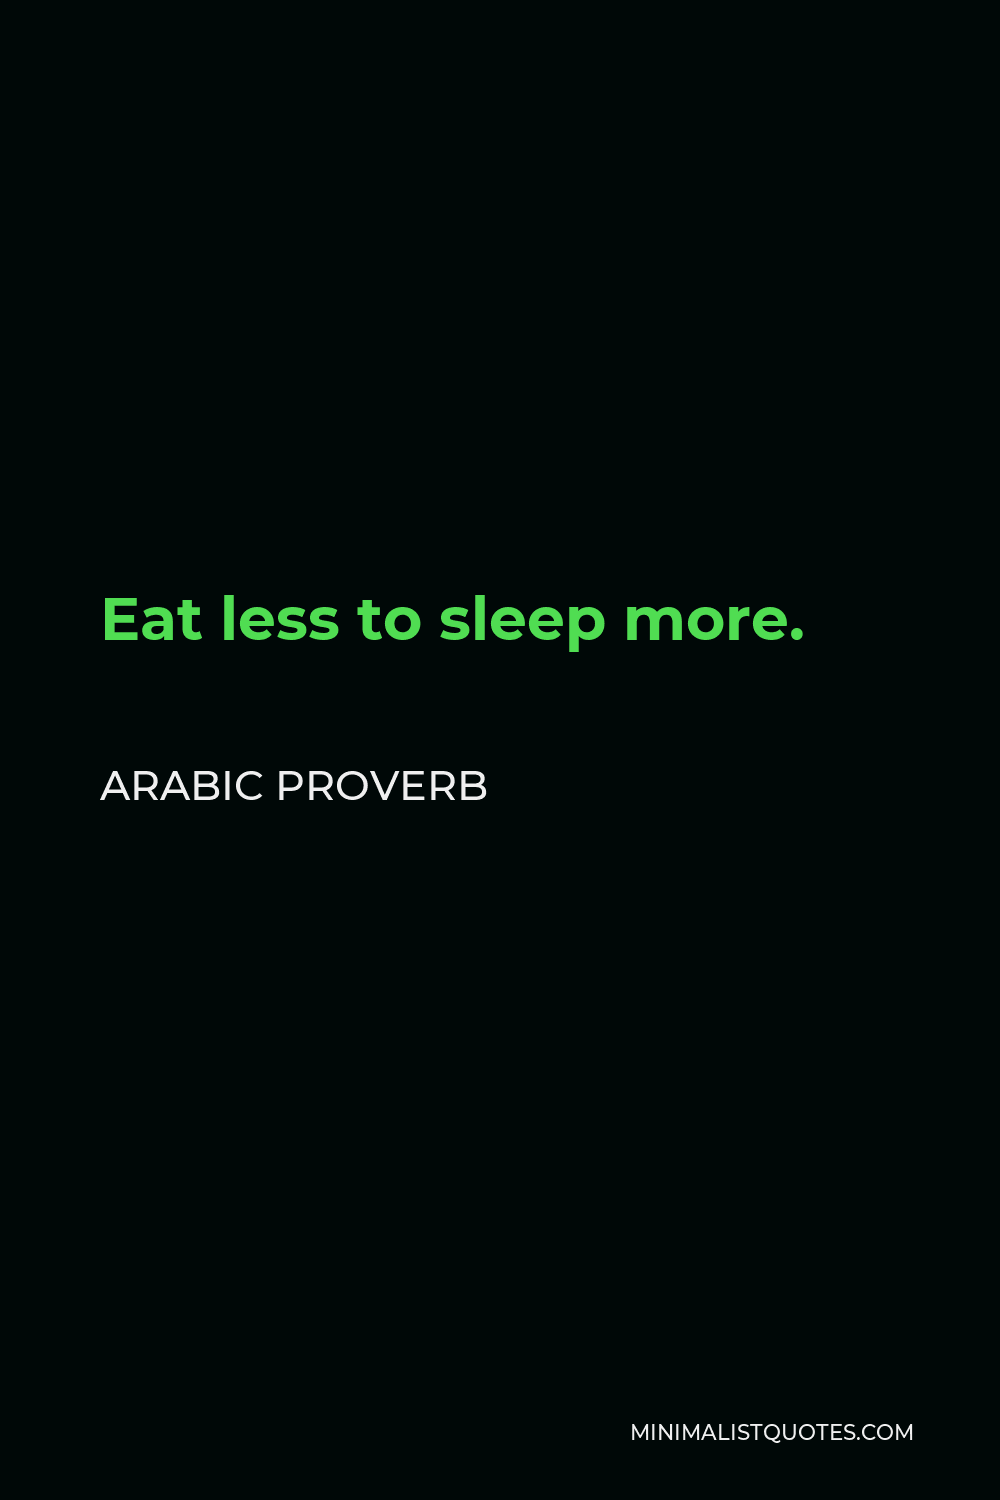 Arabic Proverb Quote - Eat less to sleep more.